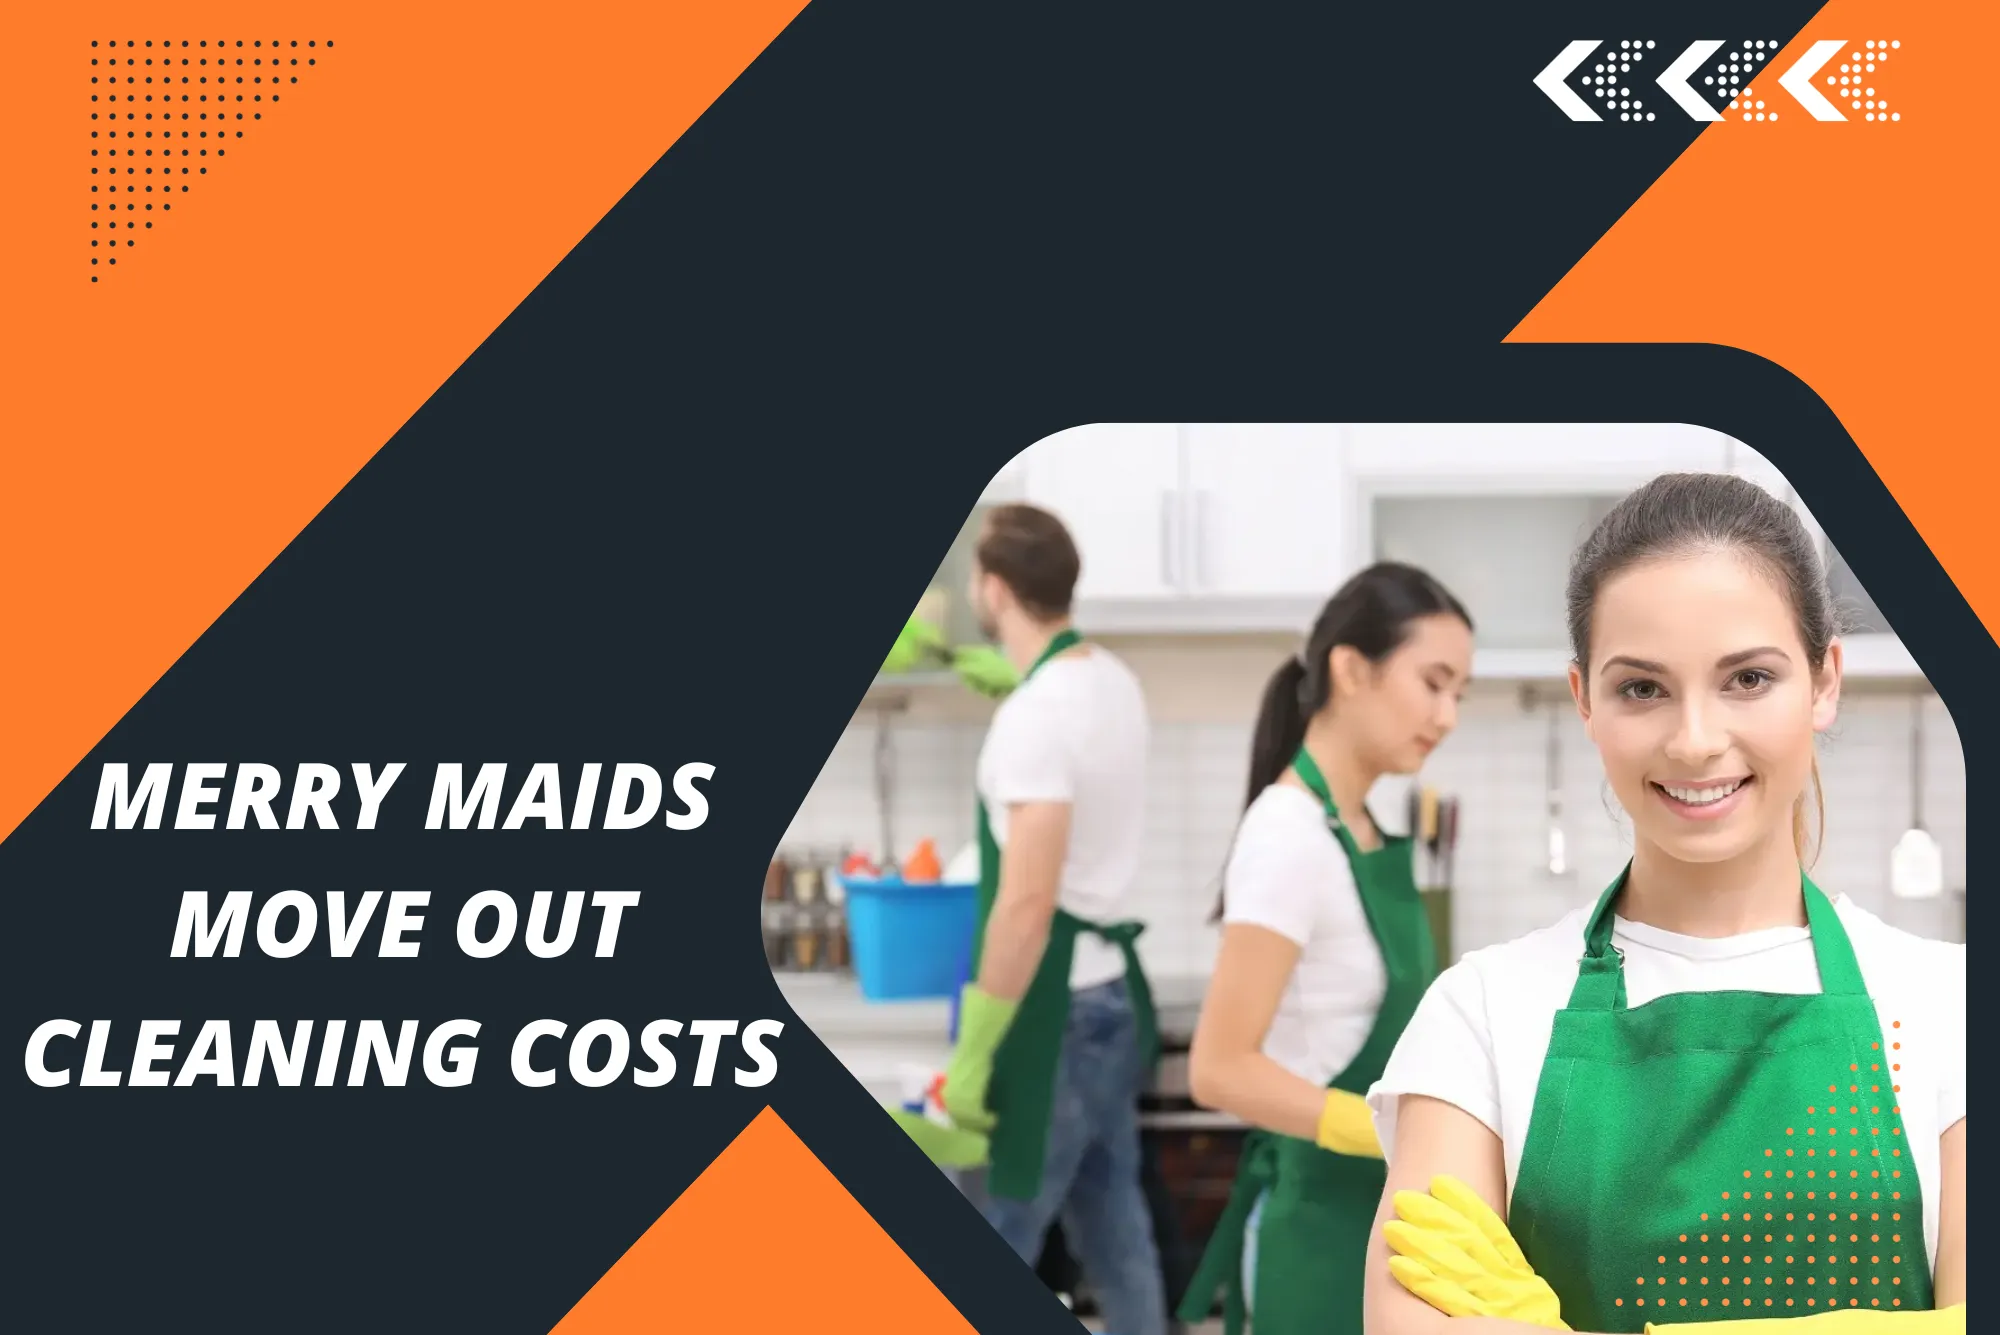 Merry Maids Move Out Cleaning Costs